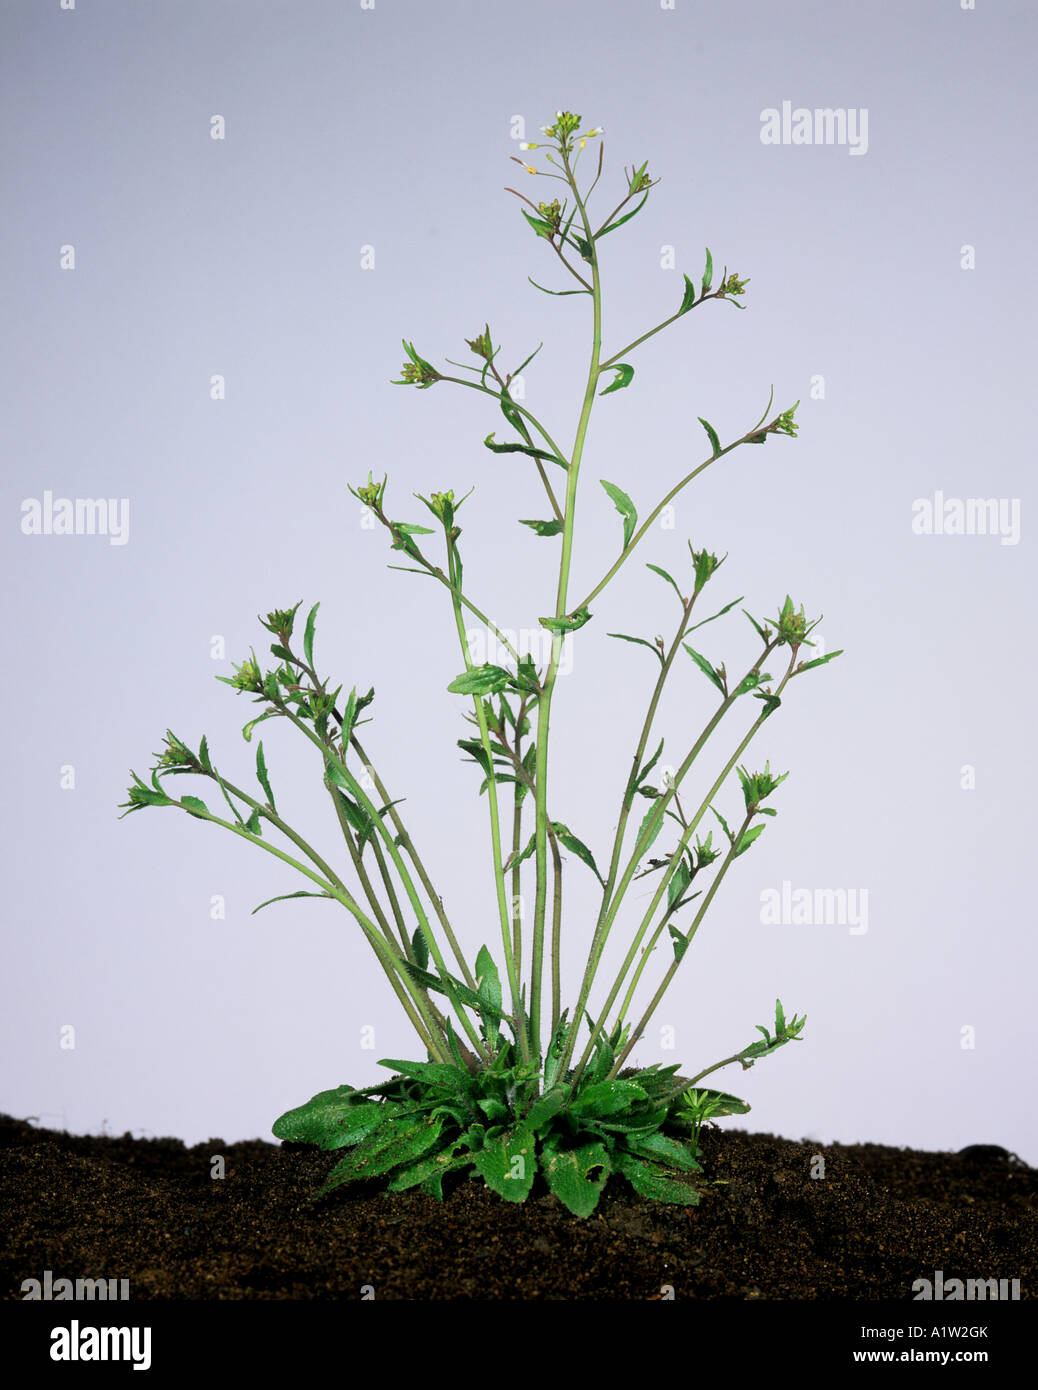 Thale cress or mouse ear cress Arabidopsis thaliana flowering plant used in genetic studies Stock Photo